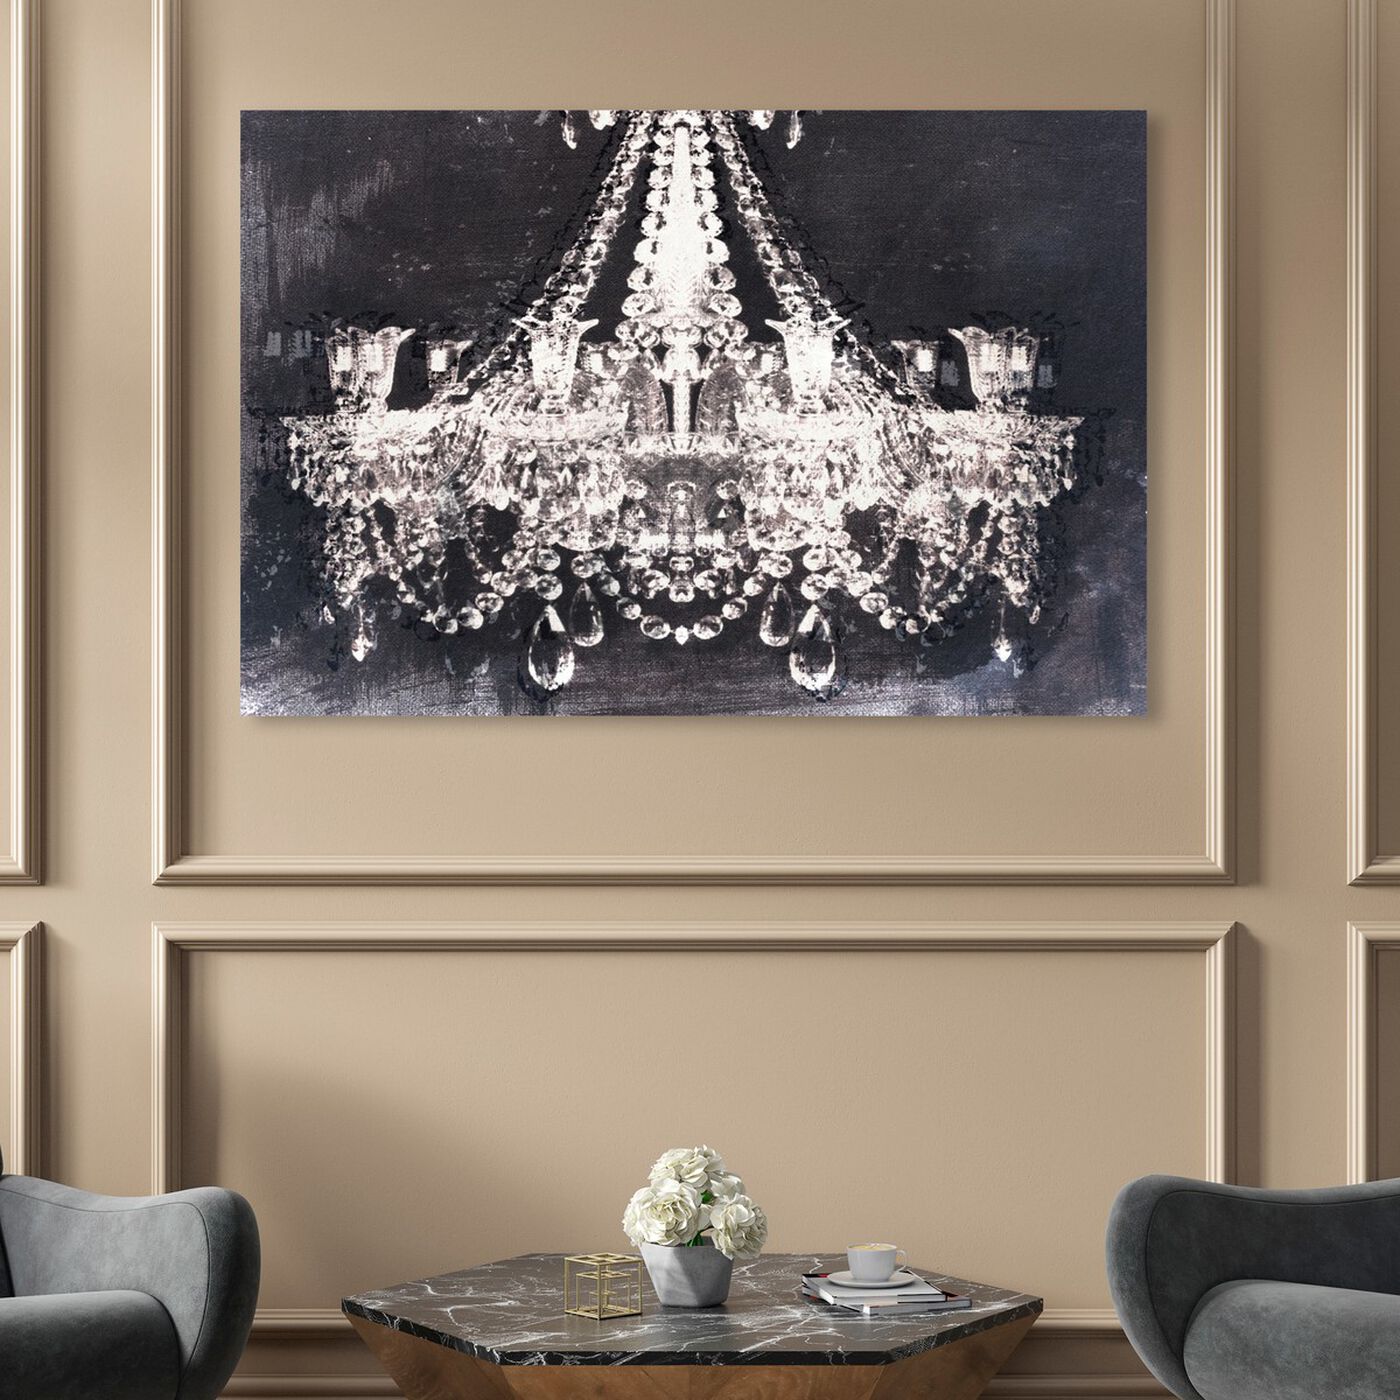 Hanging view of Dramatic Entrance Night featuring fashion and glam and chandeliers art.